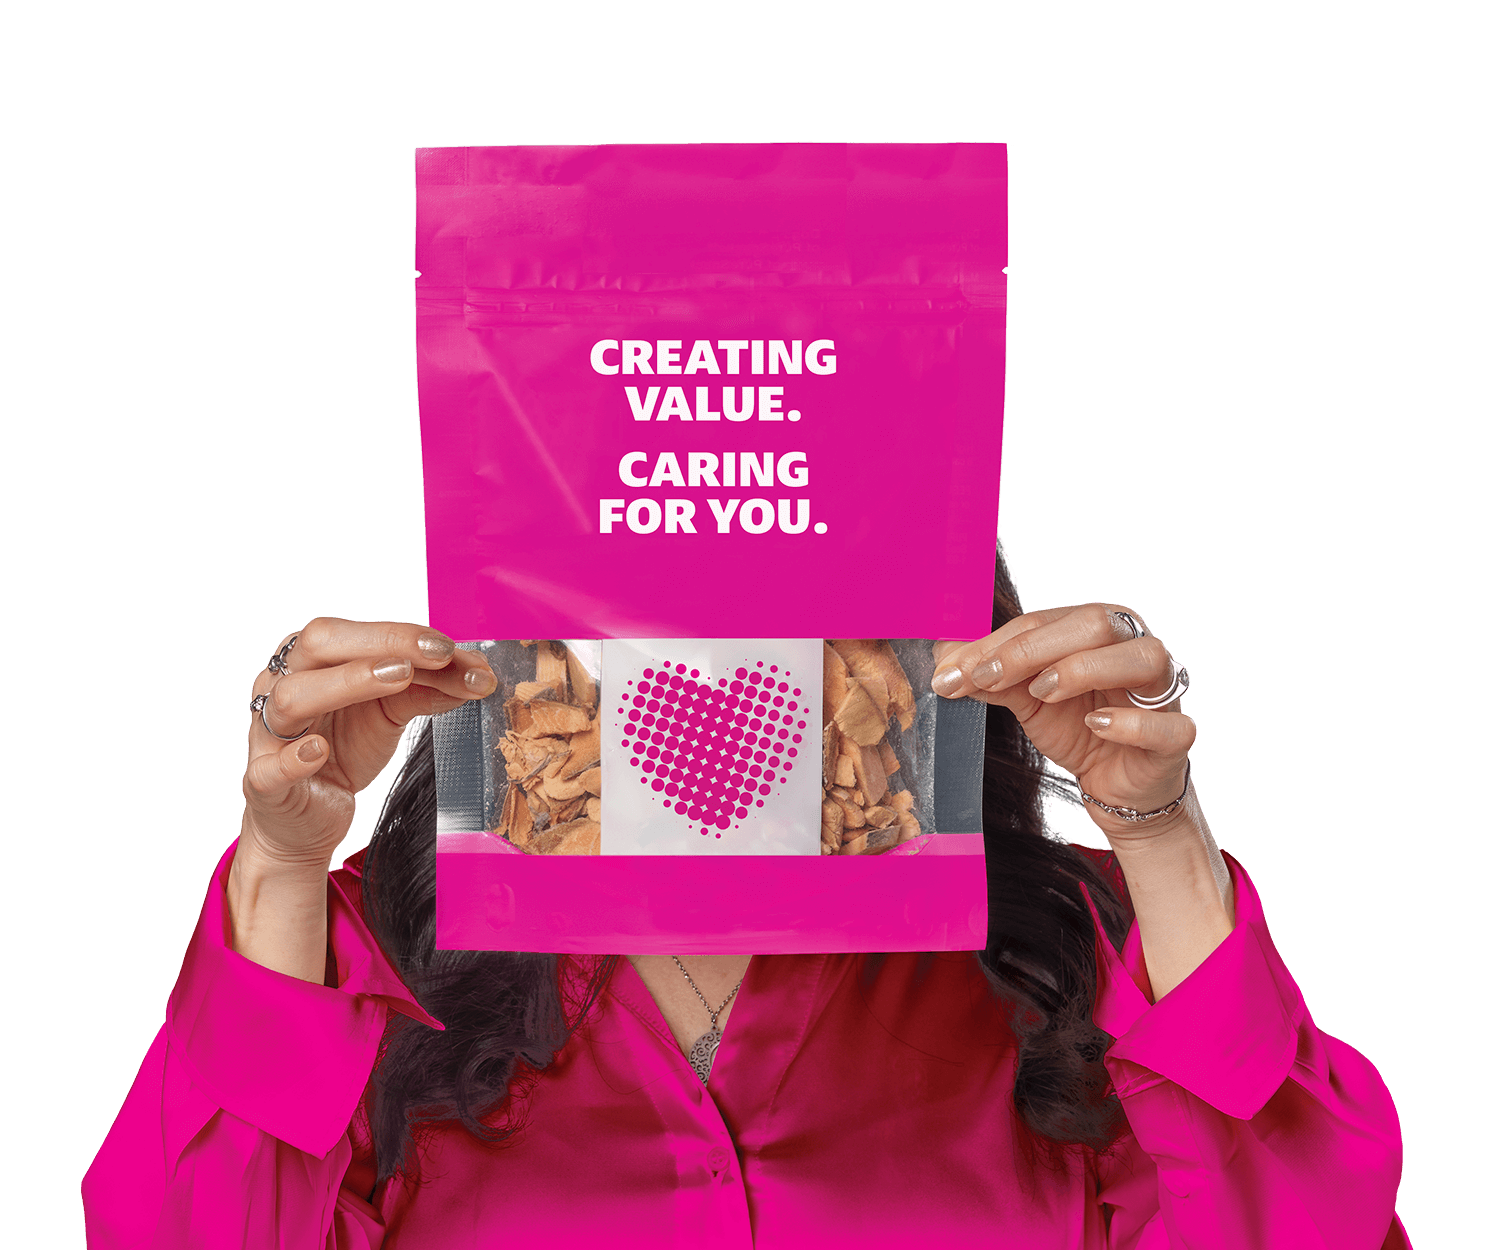 Creating value. Caring for you. TC.